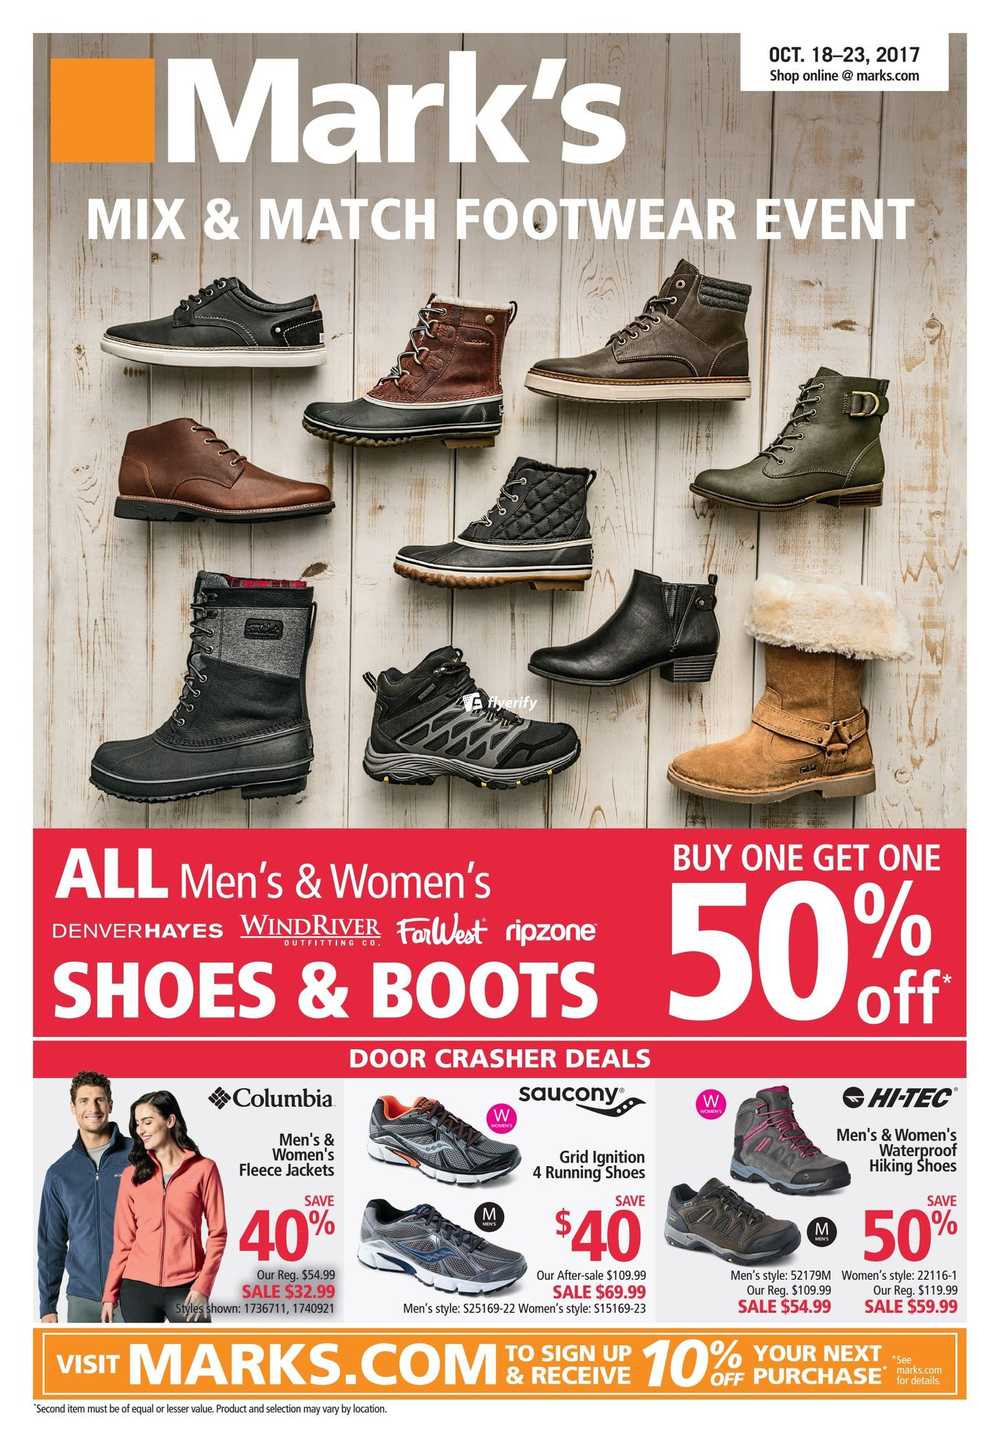 womens boots marks work warehouse,New 